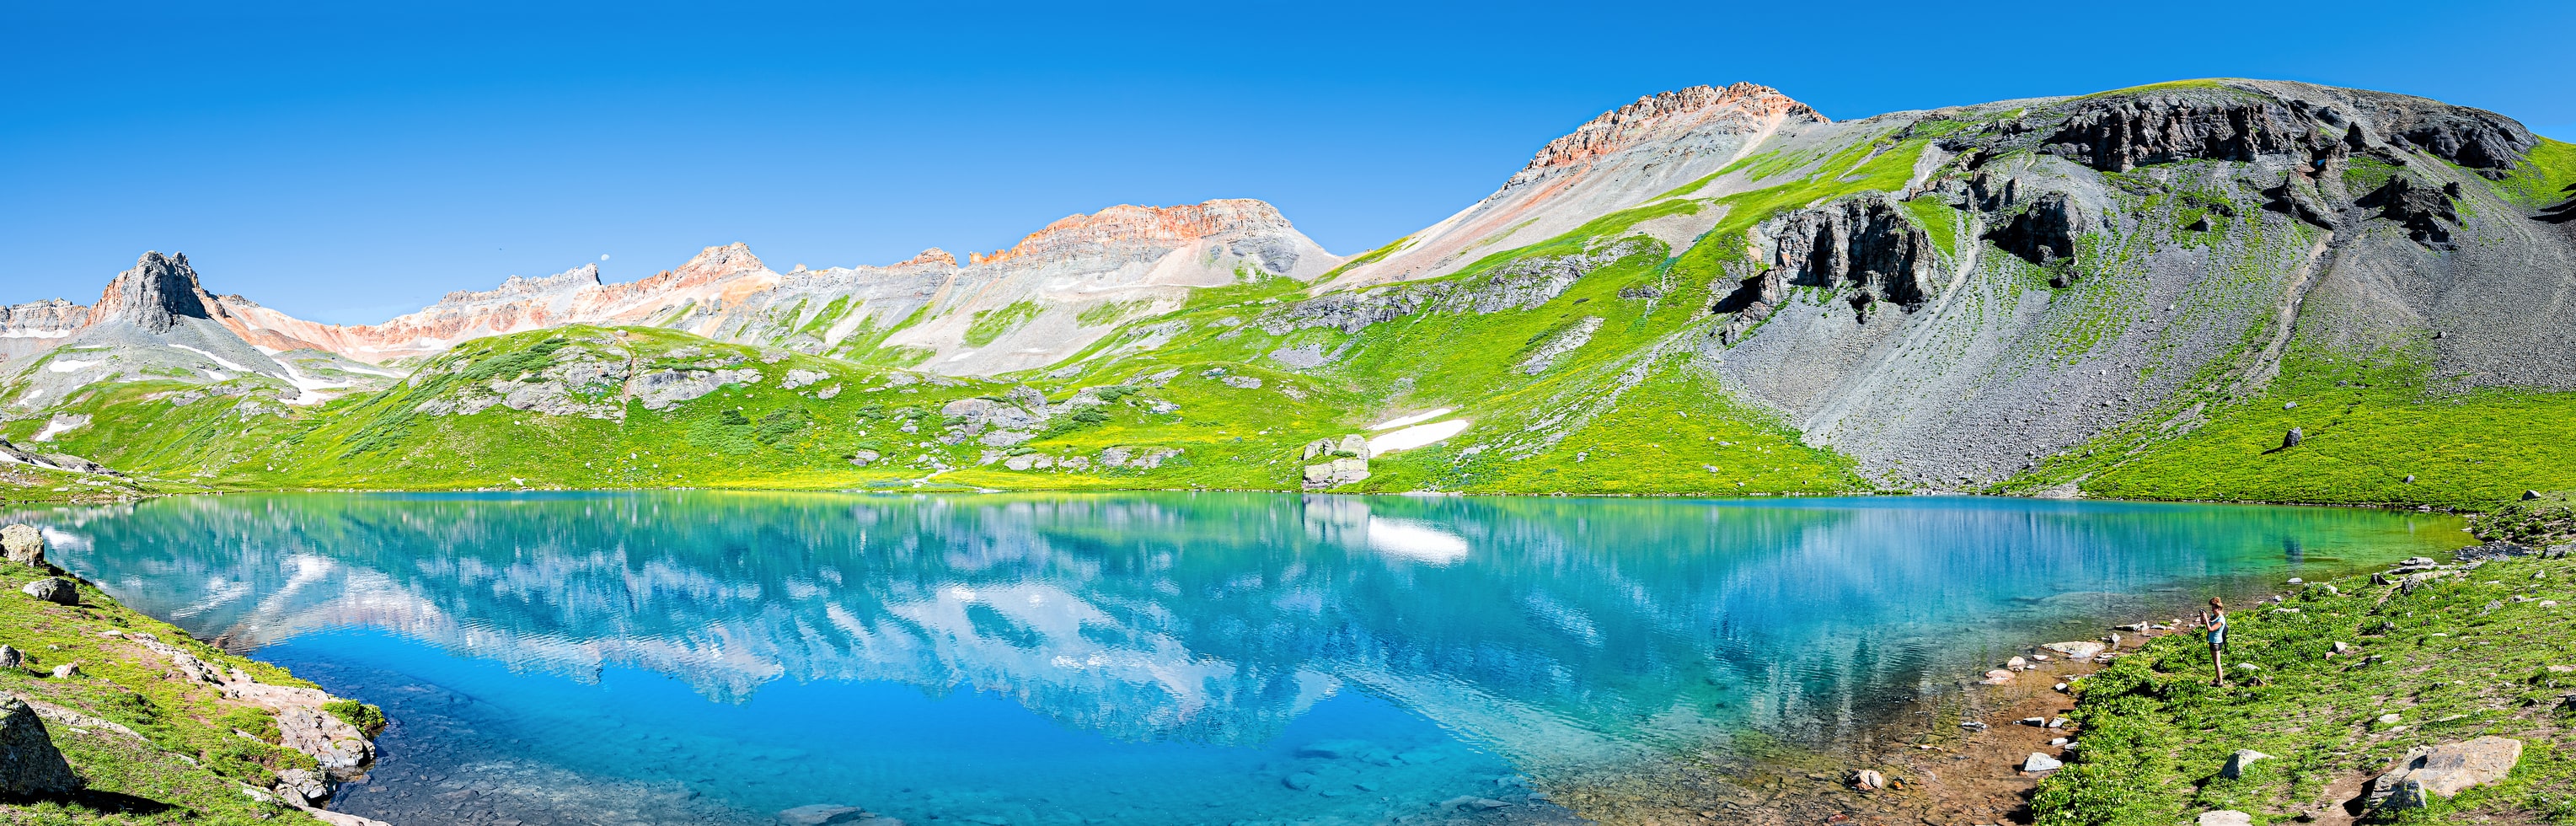 crystal blue water lake in colorado mountains